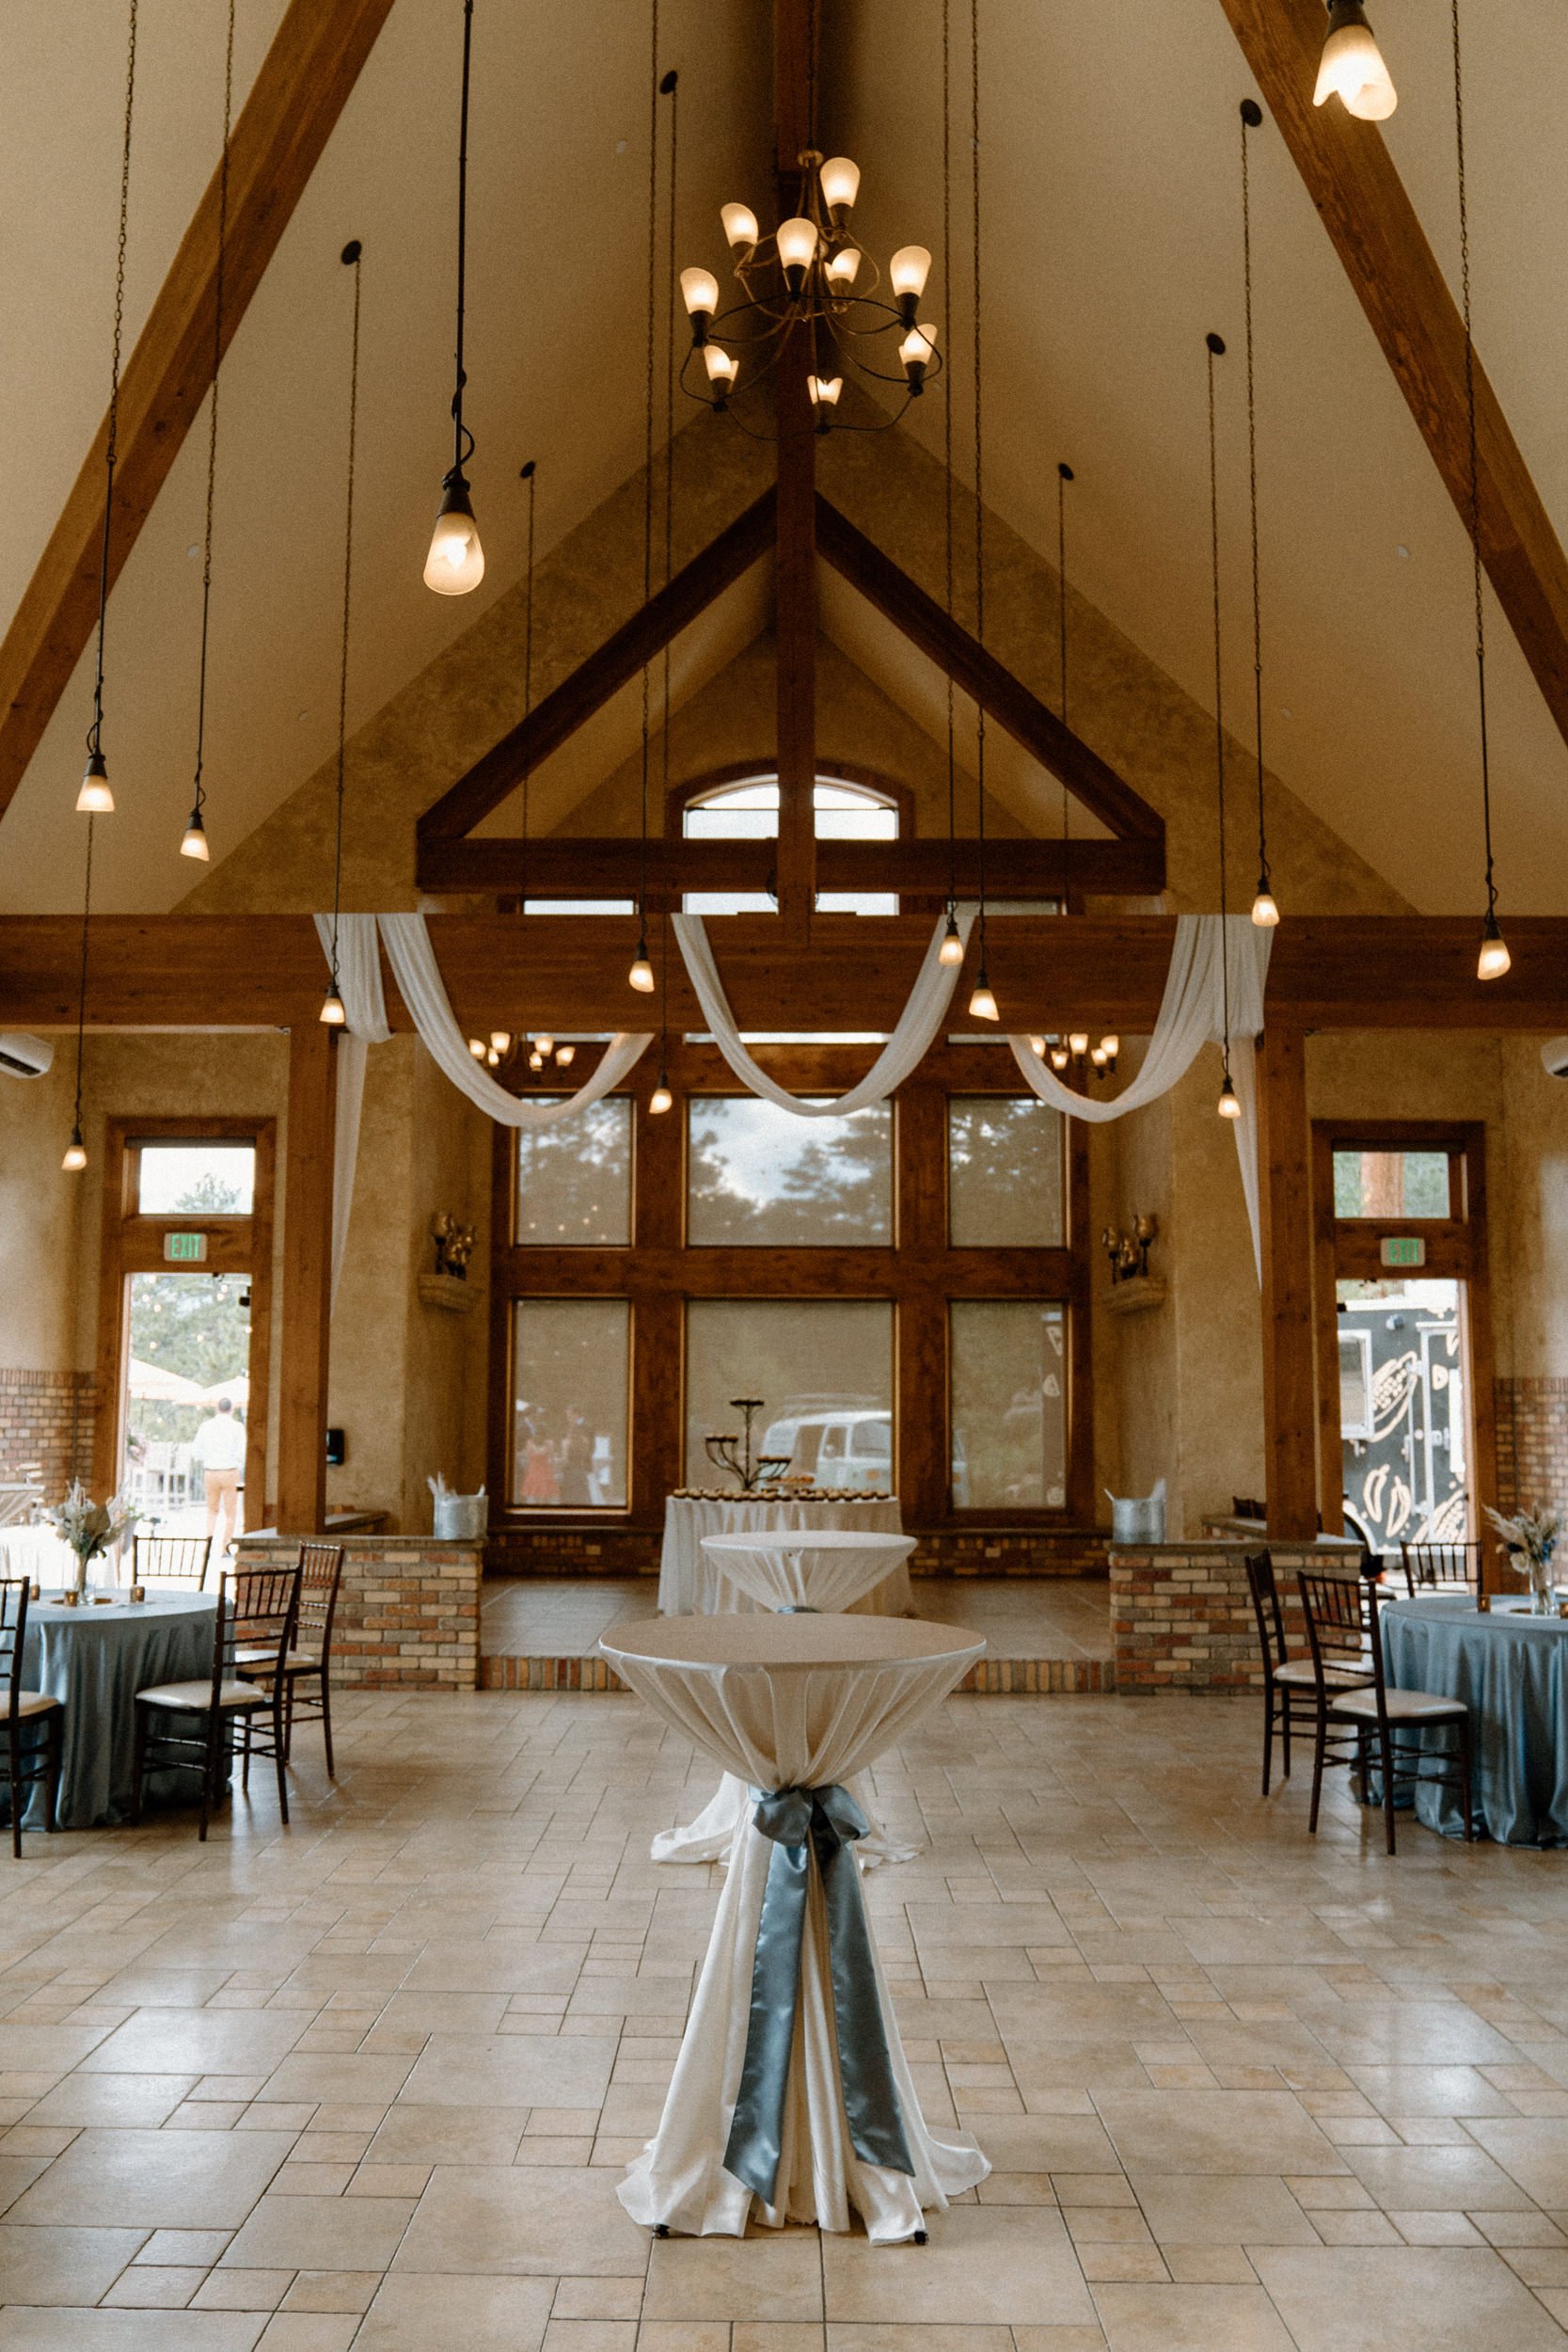 The reception area decorated with white drapes and blue table covers at the Della Terra Mountain Chateau in Estes Park, CO